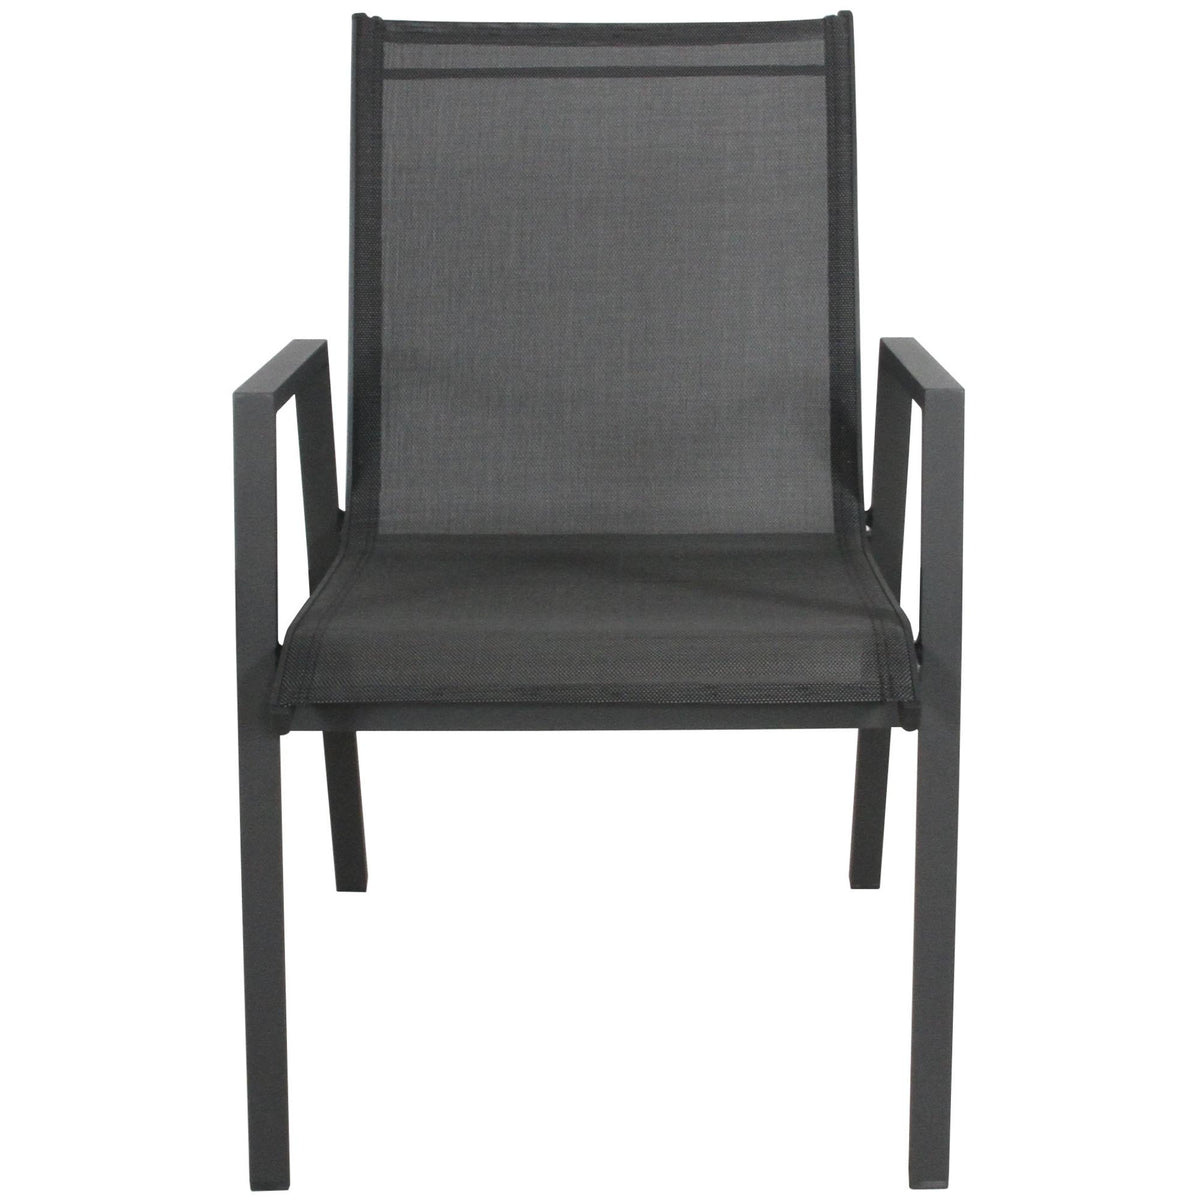 Iberia 2pc Set Outdoor Dining Chair Charcoal 